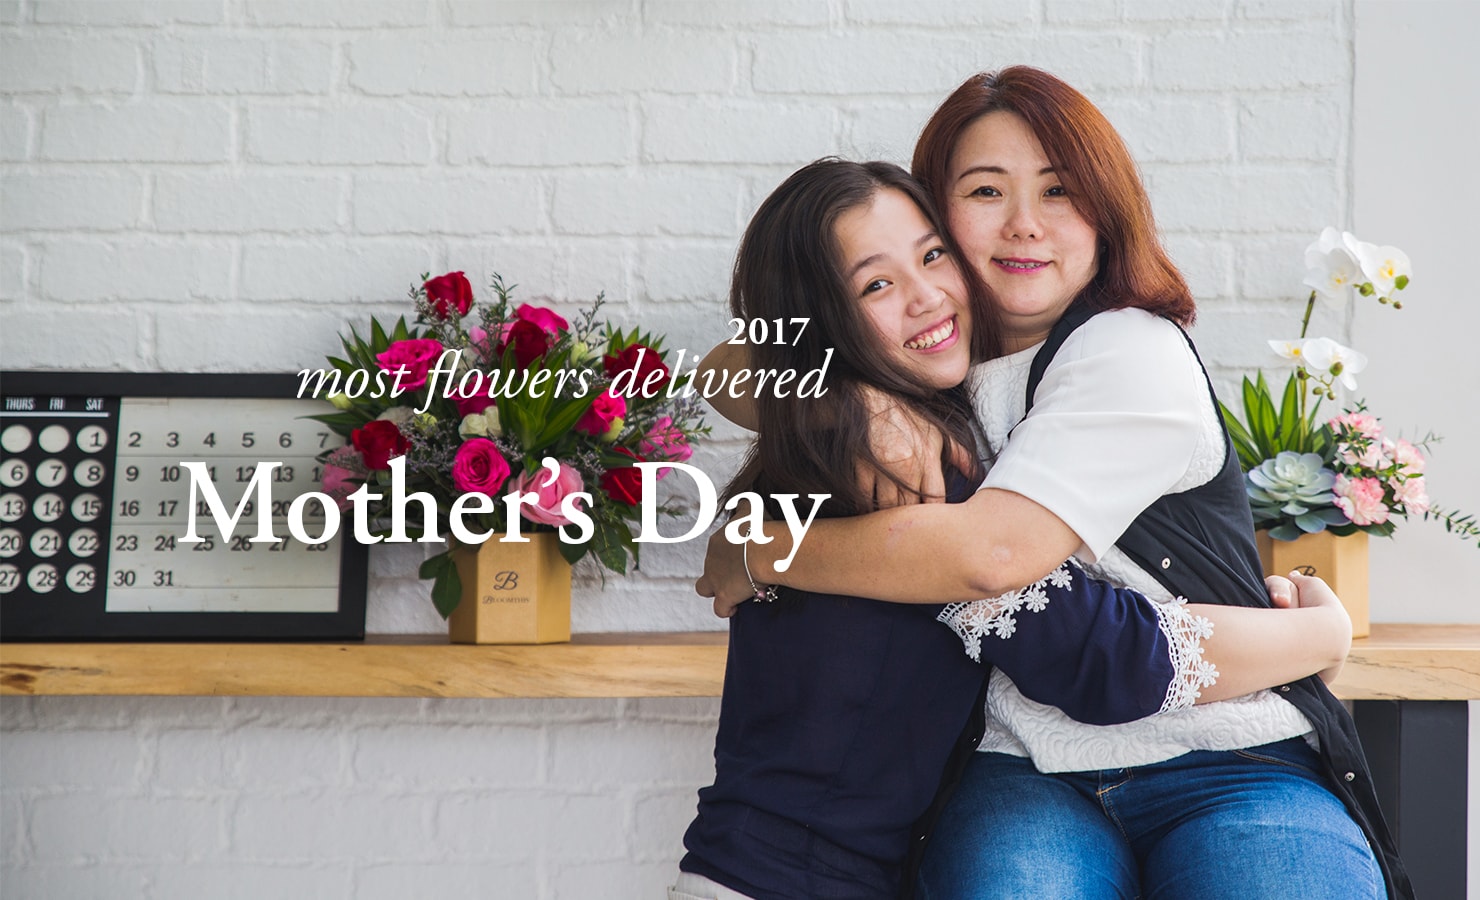 05-most-flowers-delivered-mothers-day